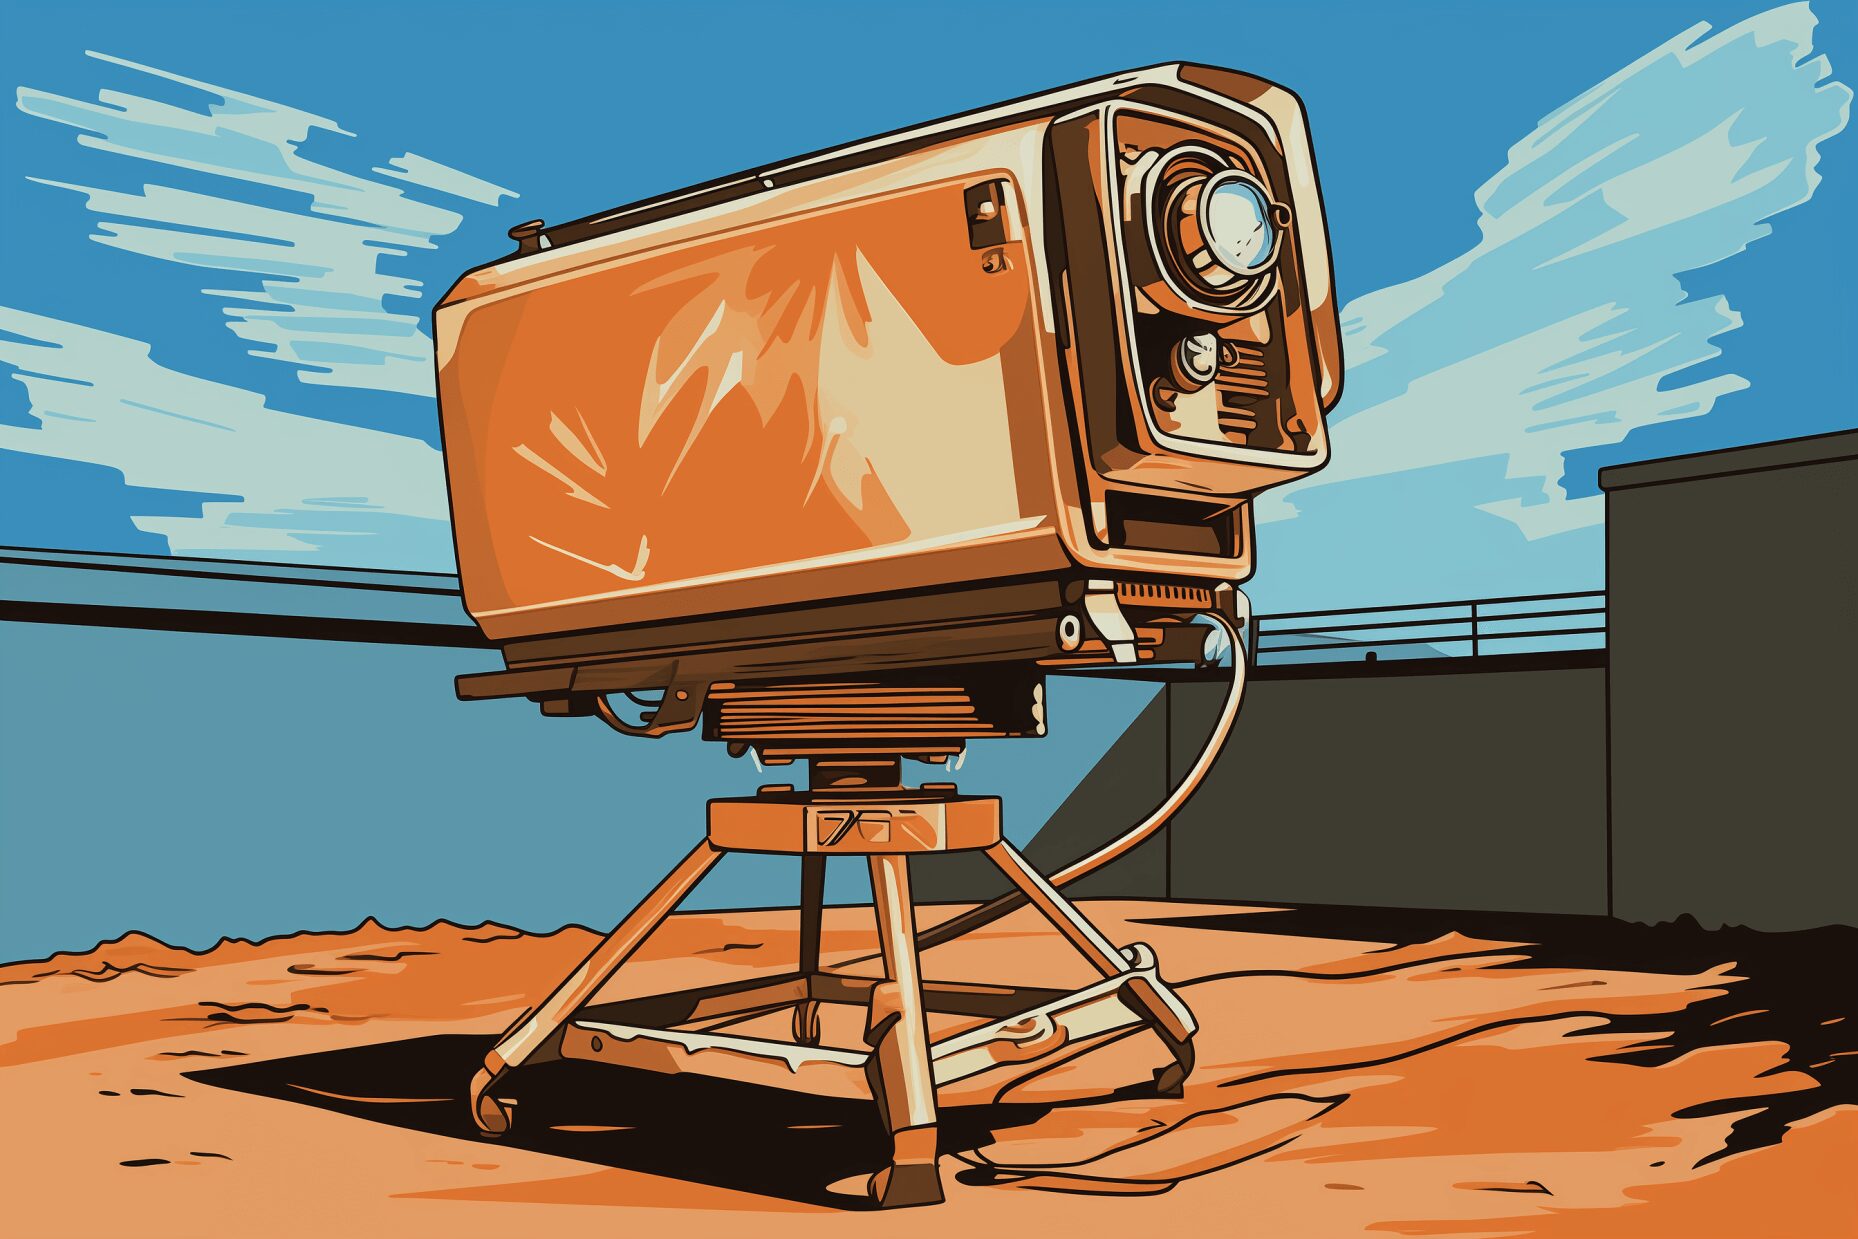 An outdoor projector